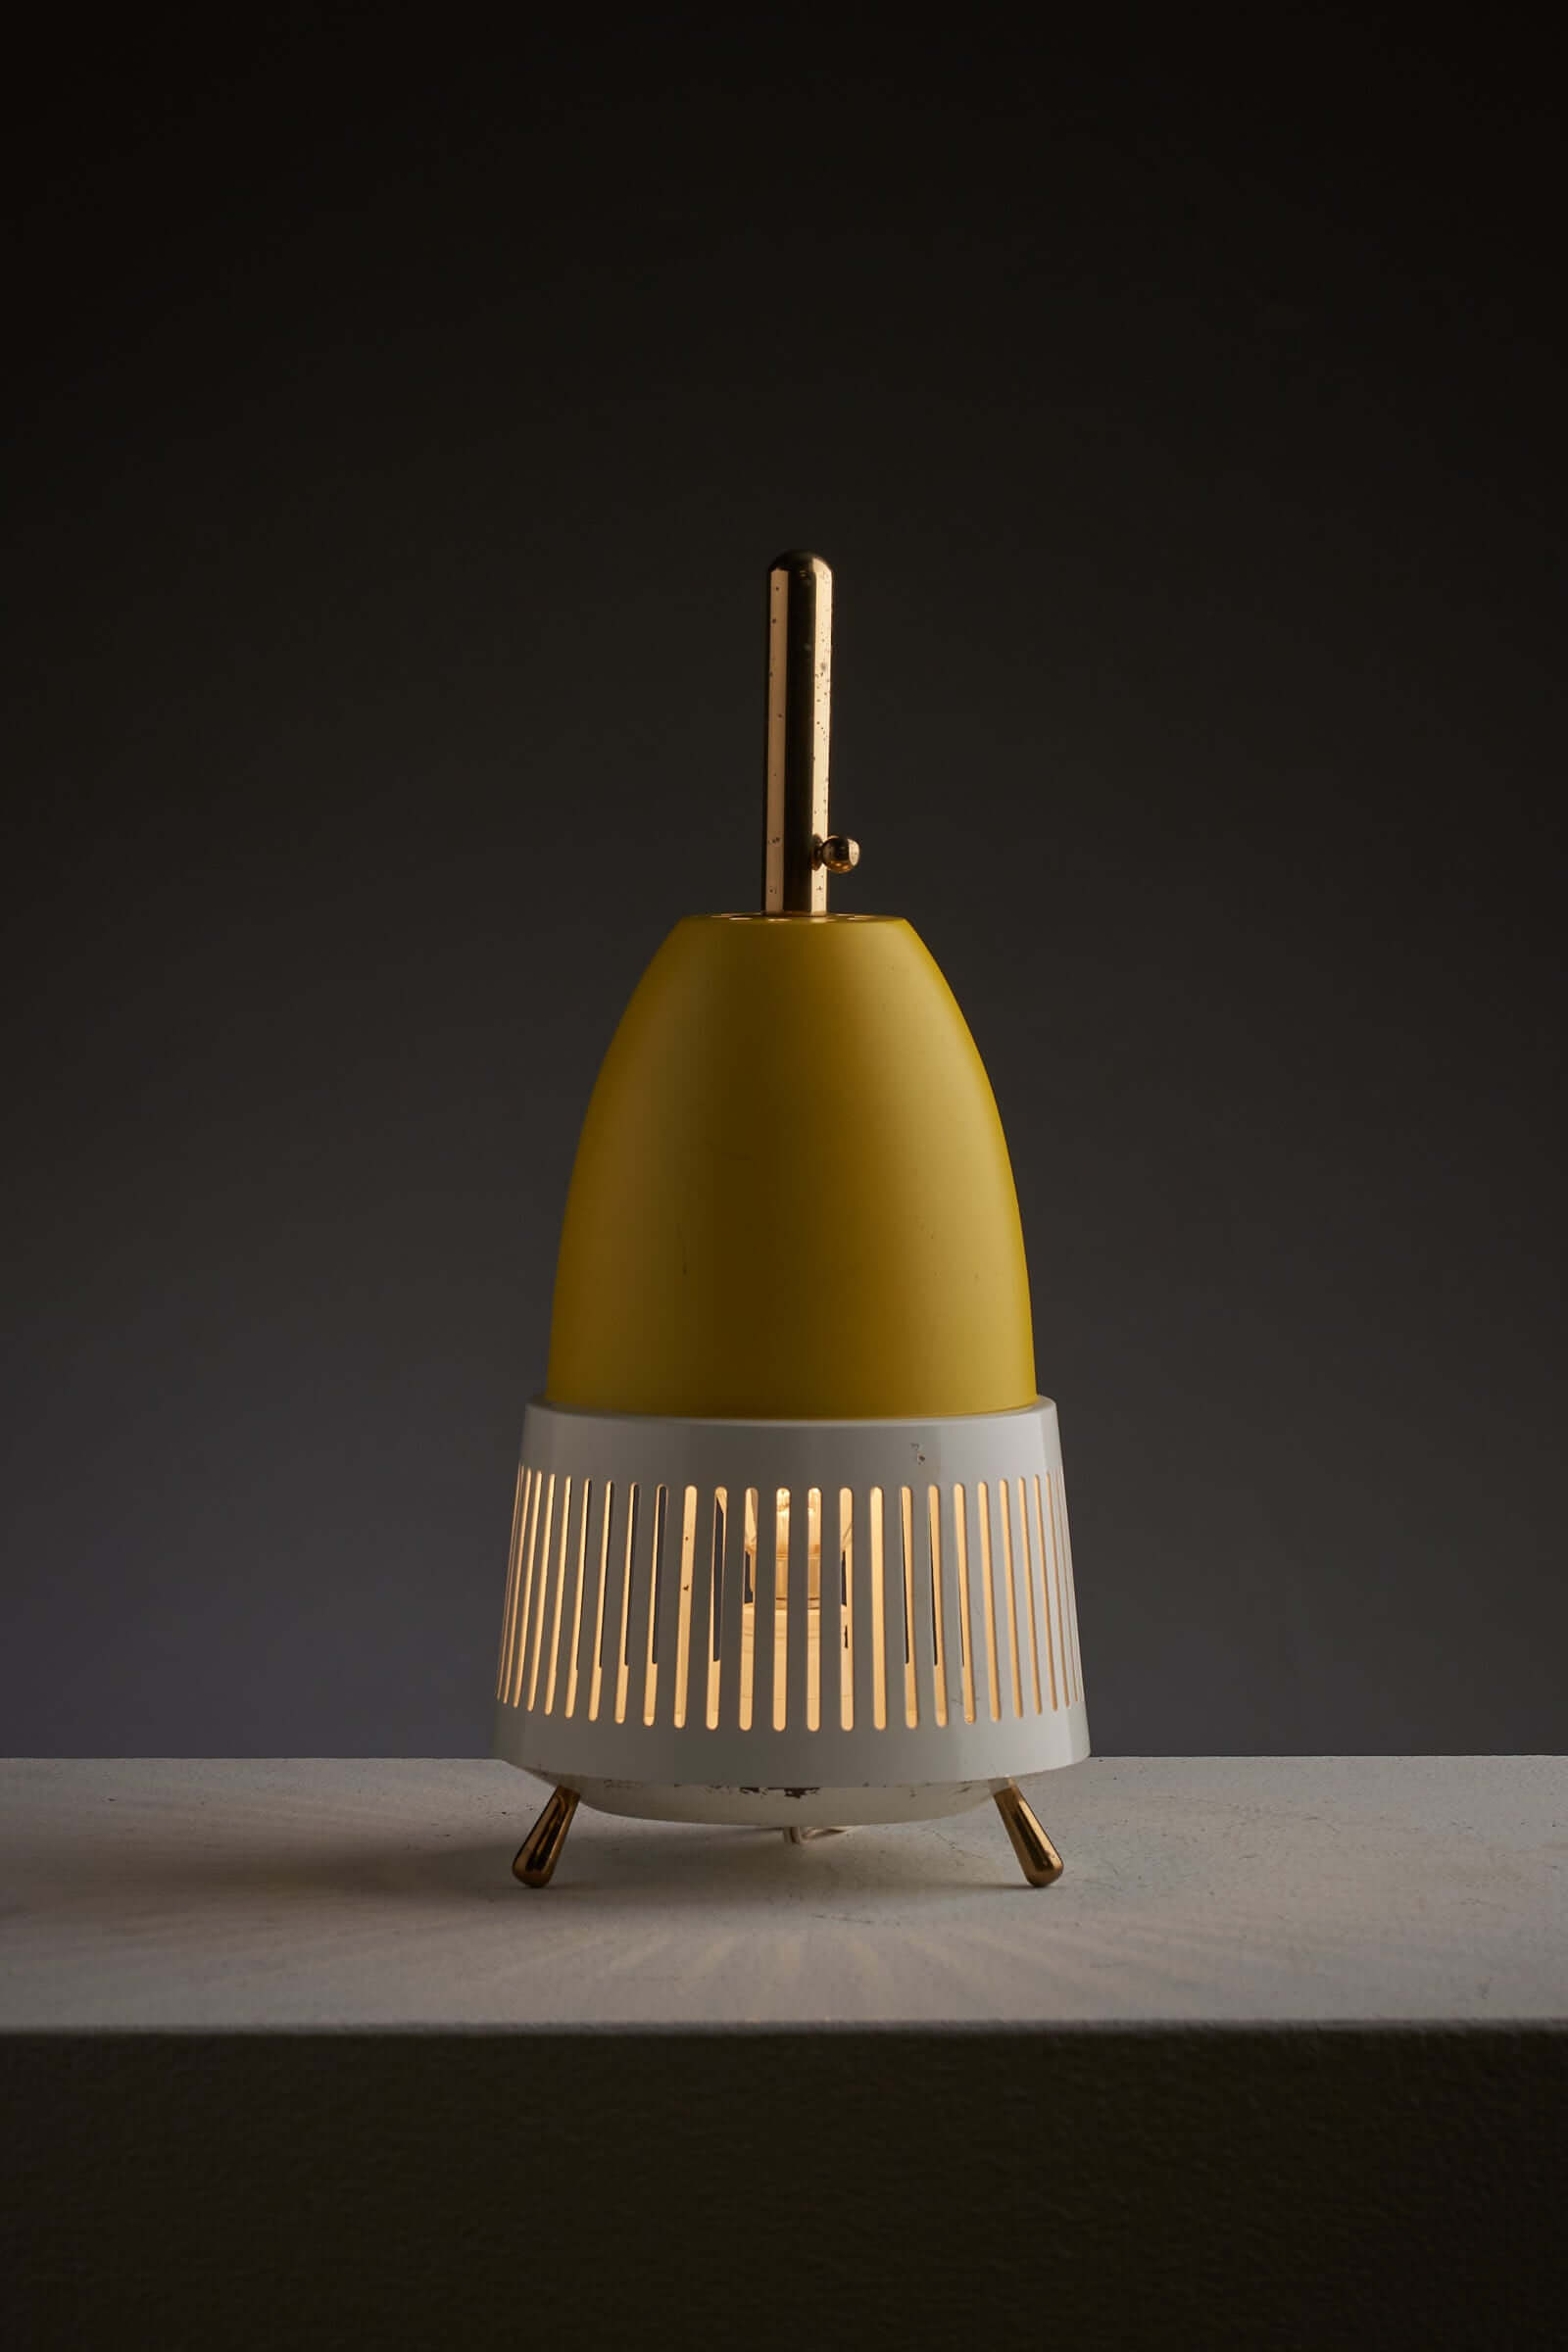 "Vintage-style brass lamp with metal shade"